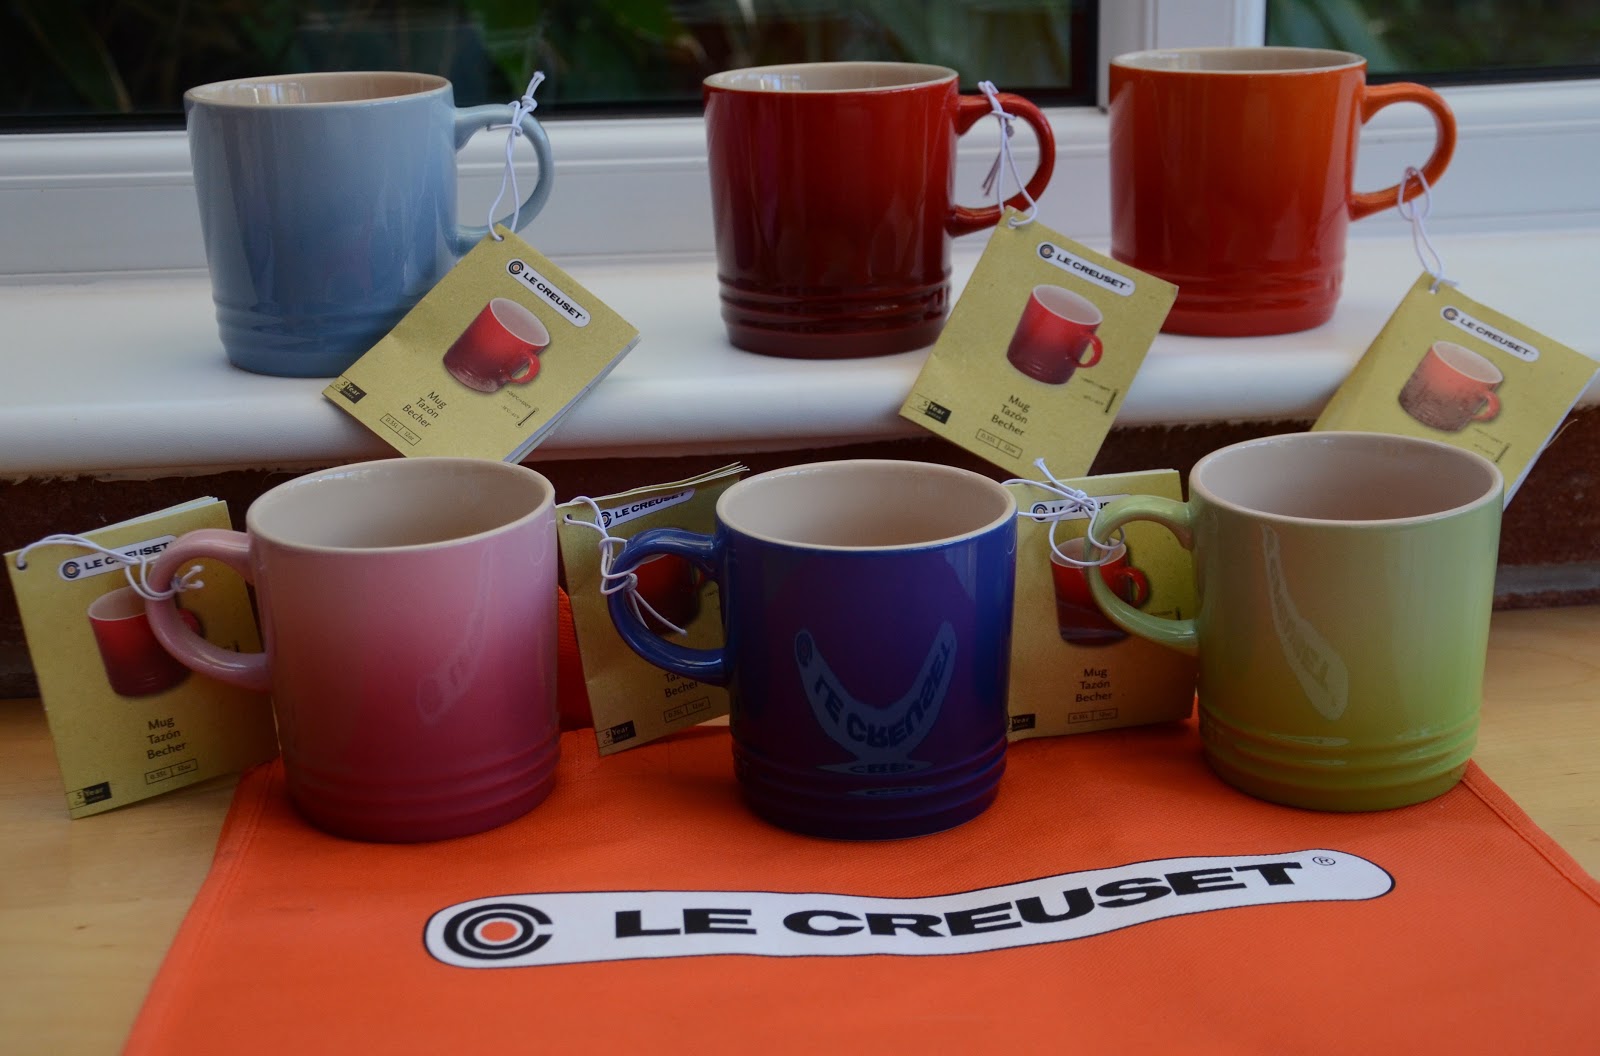 Kitch 'n' Chic Le Creuset Mugs x 6